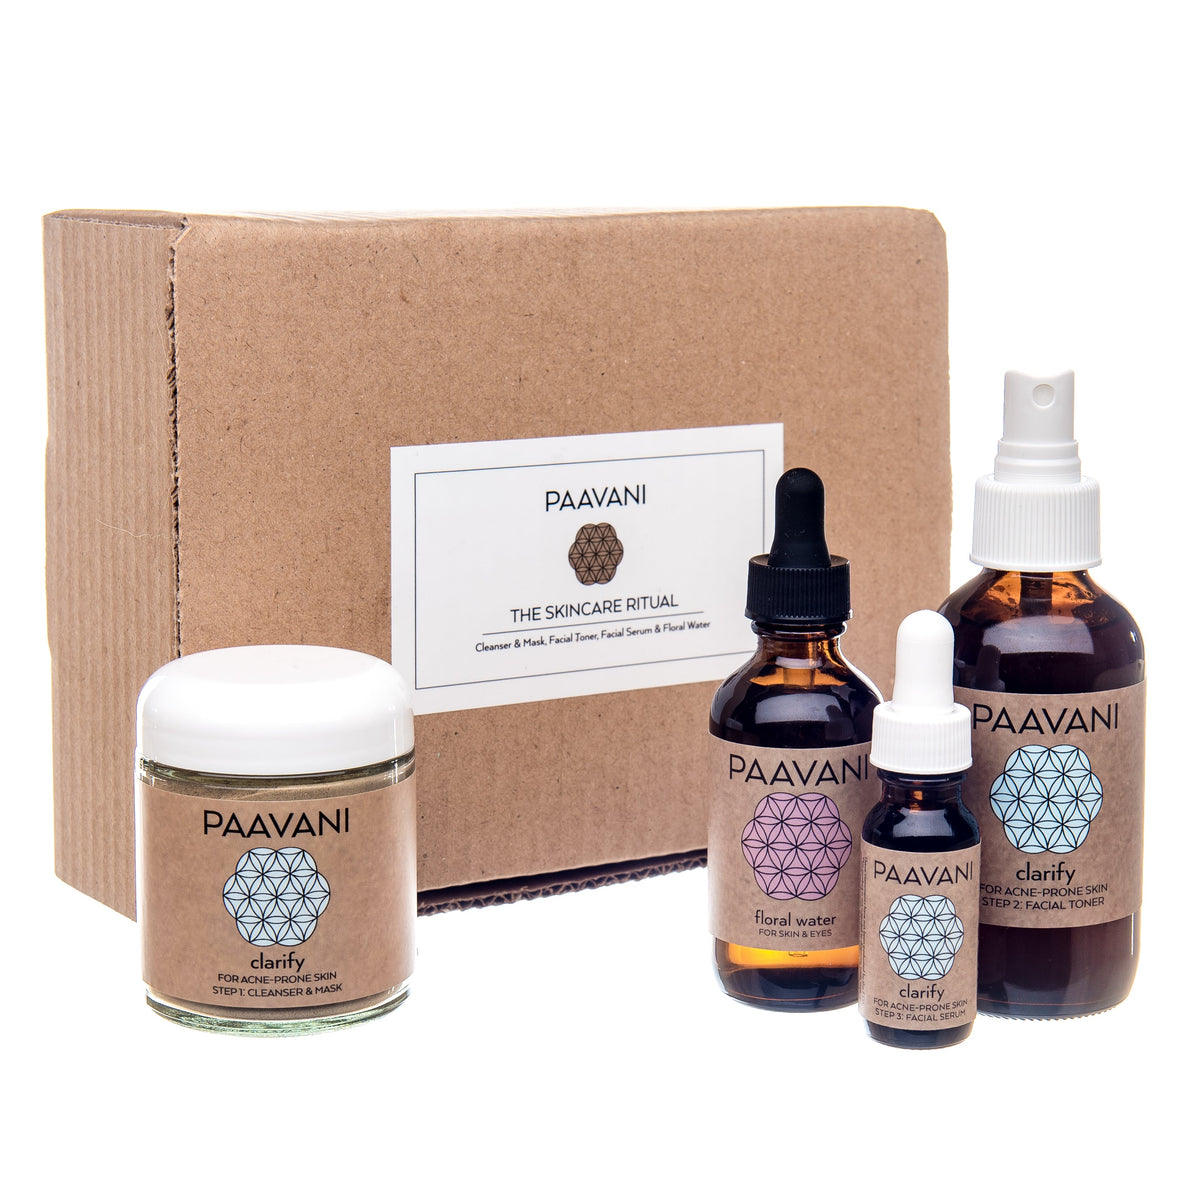 * Paavani Ayurveda - The Clarify Skincare Ritual including Clarify Cleanser & Mask, Clarify Toner, Clarify Serum and Floral Water, Ayurvedic Bundle-1